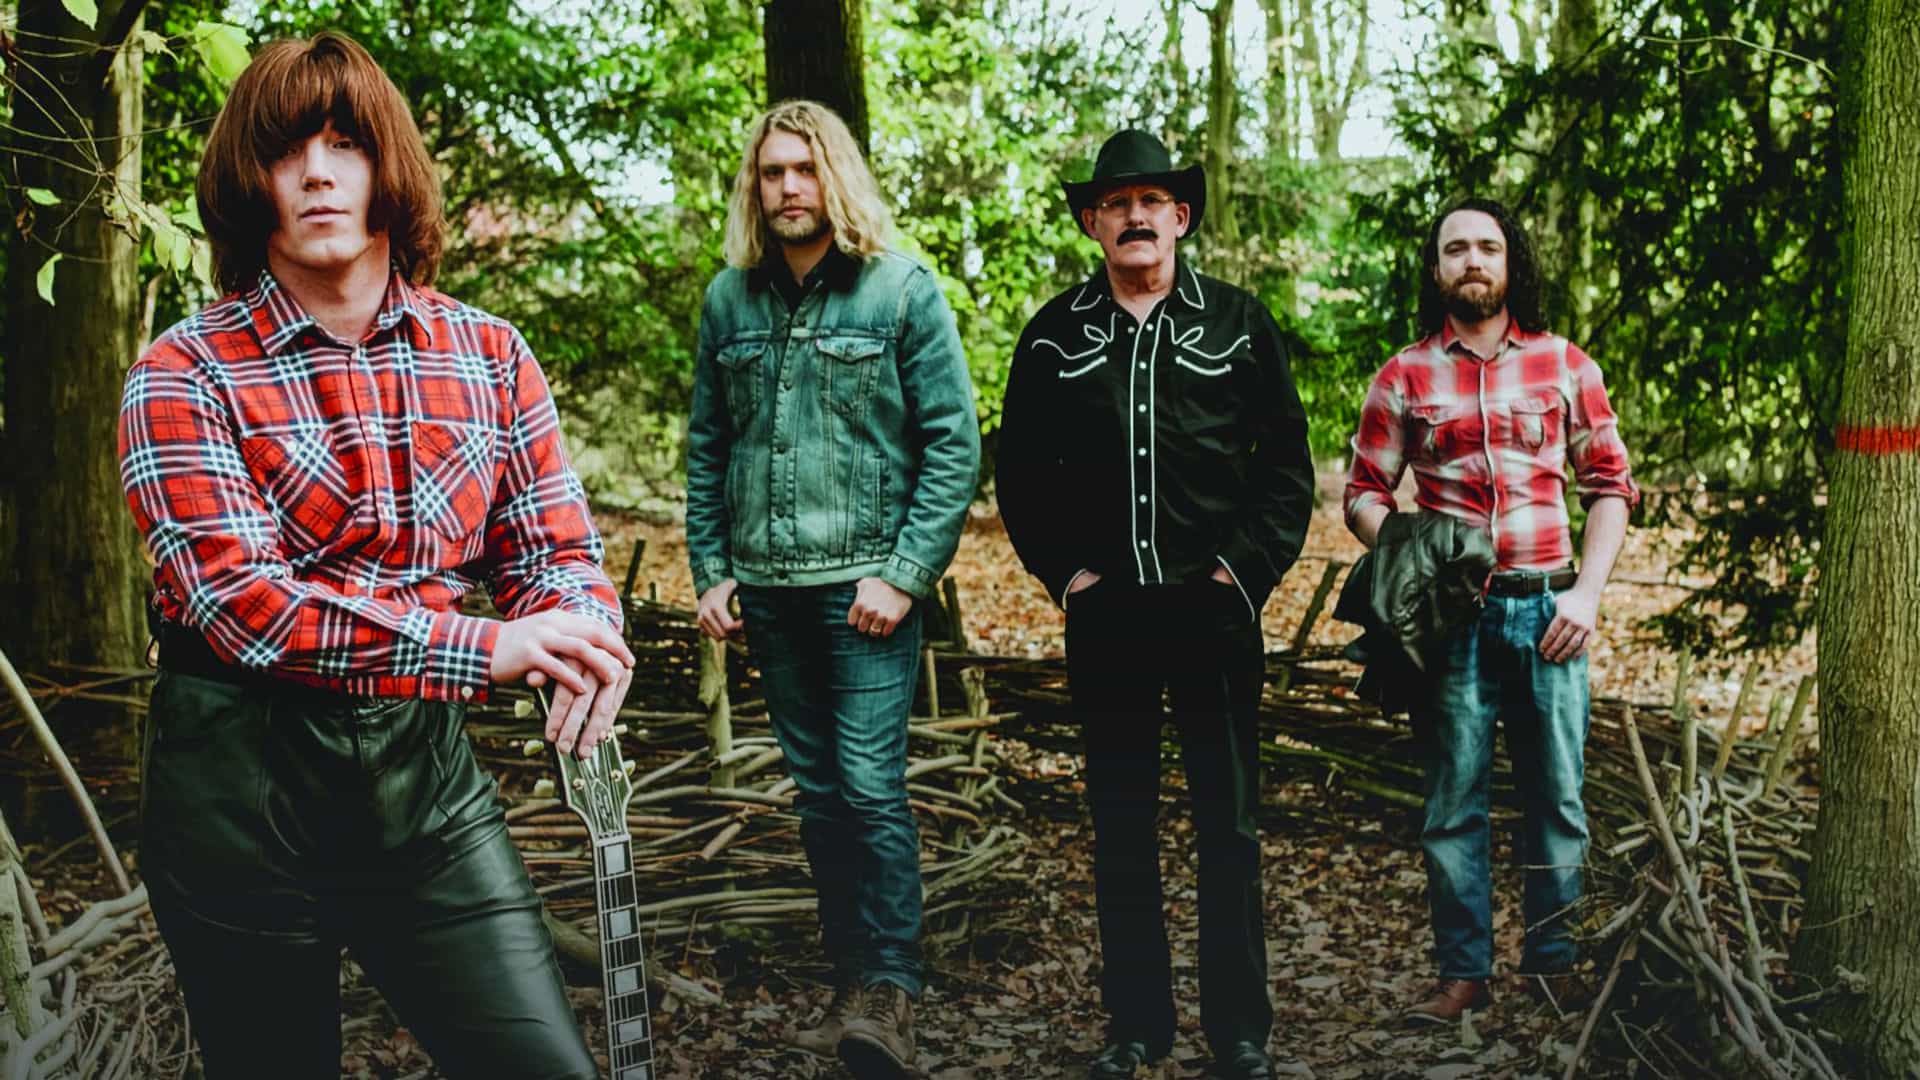 Creedence Clearwater Review - Creedence Clearwater Revival Tribute